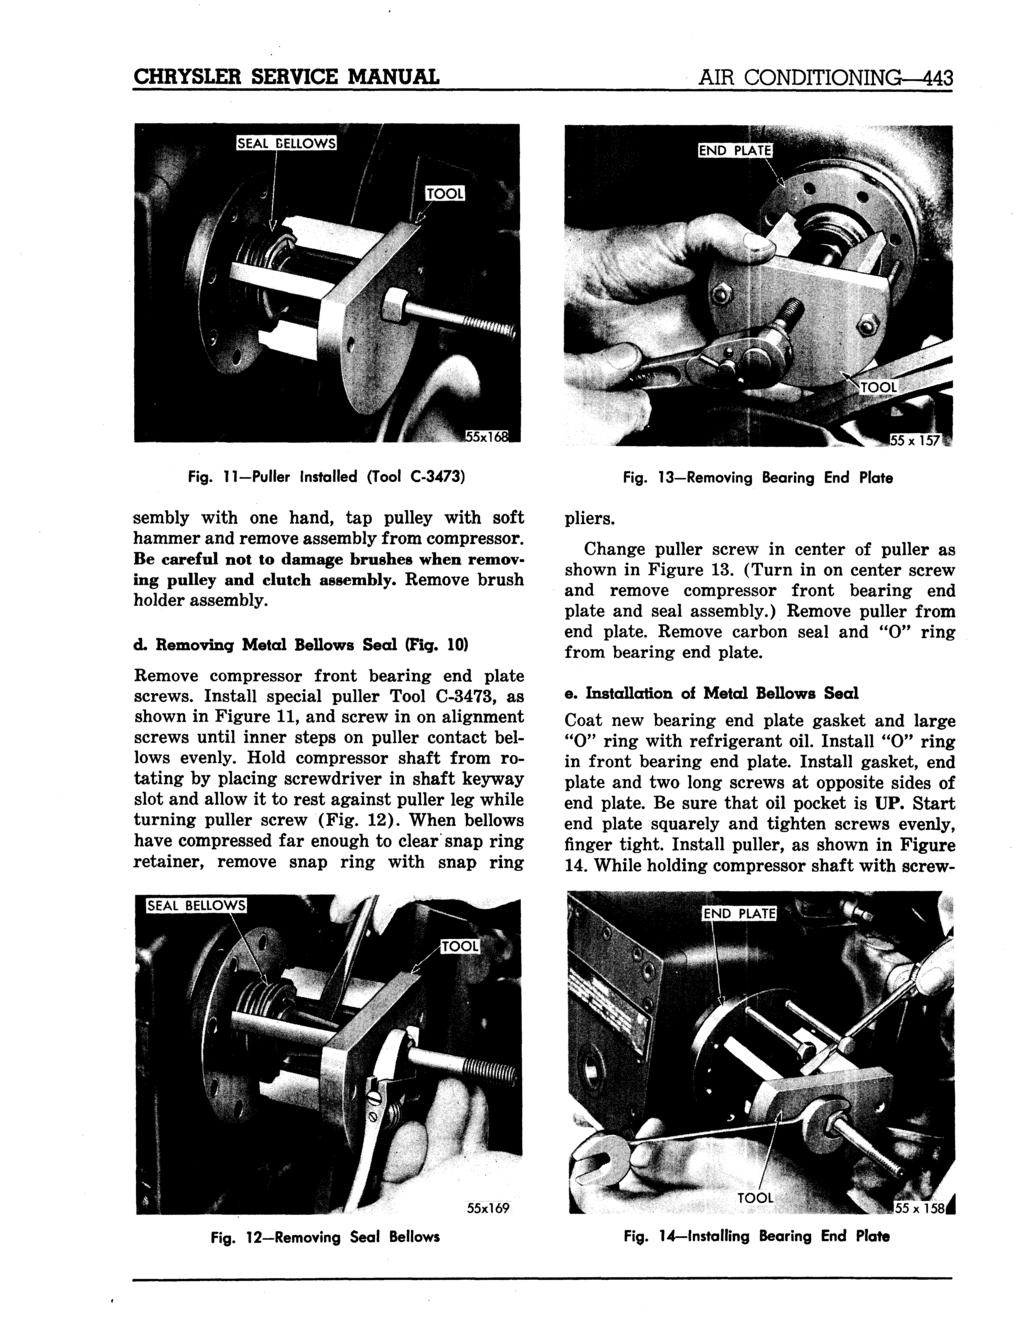 CHRYSLER SERVICE MANUAL AIR CONDITIONING 443 Fig. 11-Puller Installed (Tool C-3473) sembly with one hand, tap pulley with soft hammer and remove assembly from compressor.